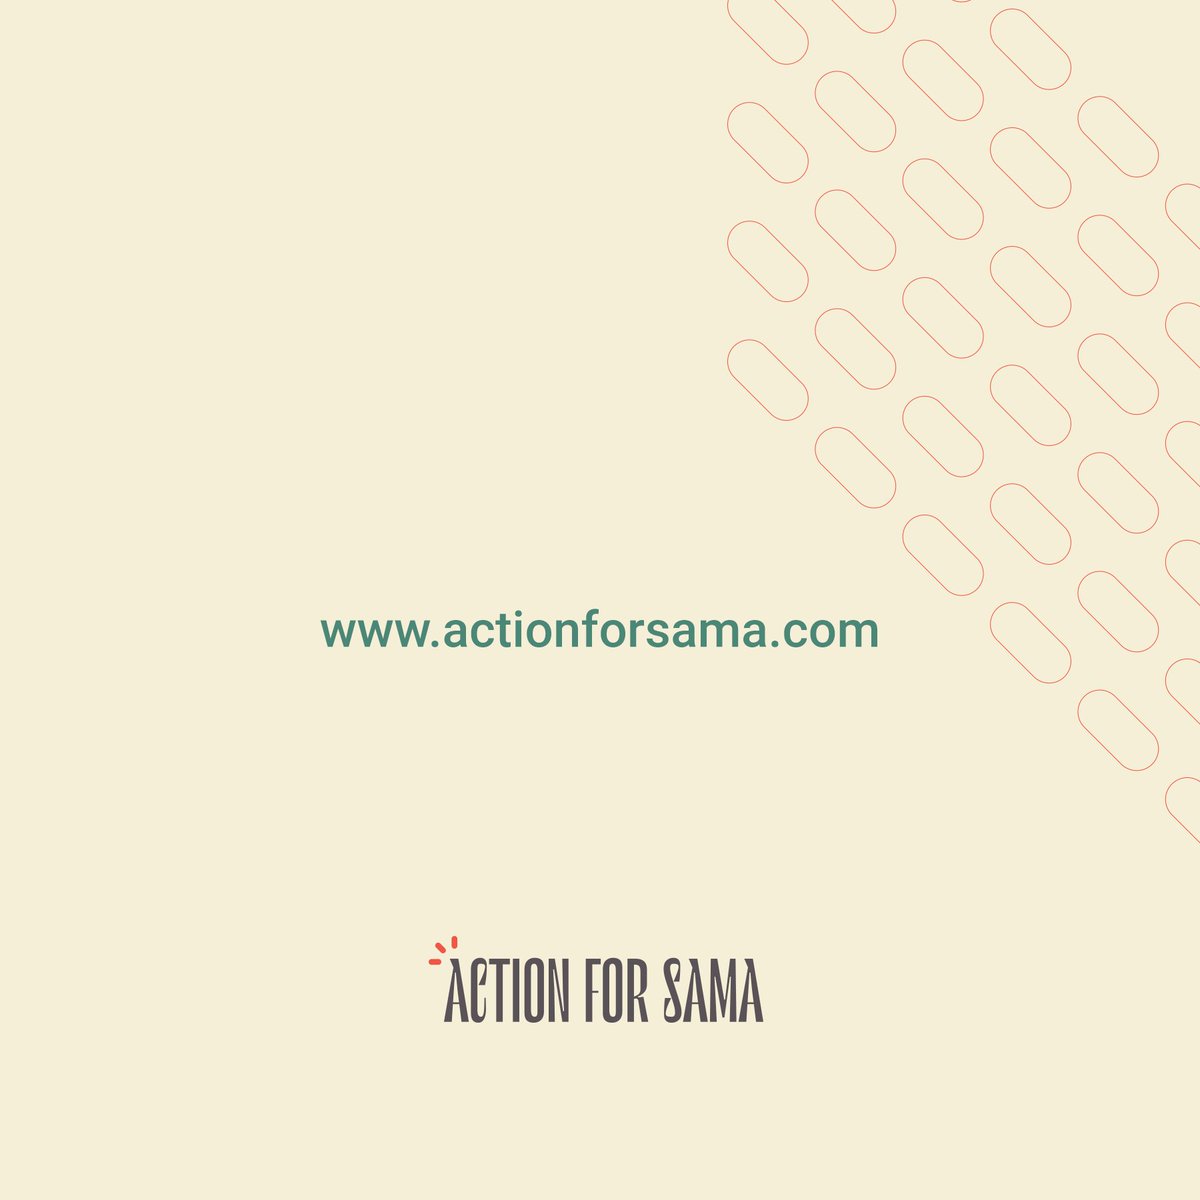 (2/2) continue #ActionForSama #AFS #HumanRights #syria